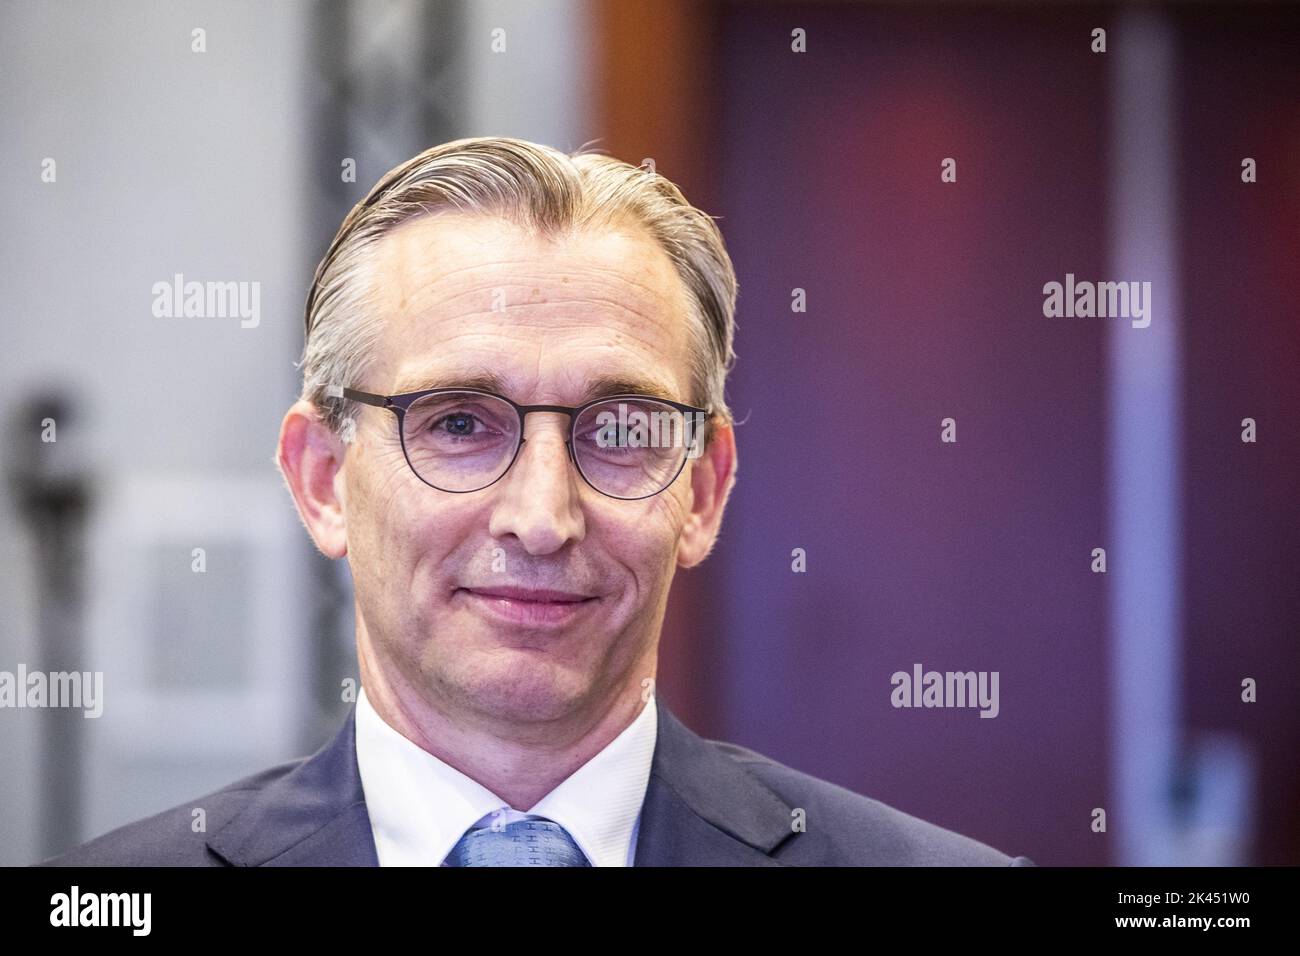 2022-09-30 09:24:35 AMSTERDAM - CEO Roy Jakobs of Koninklijke Philips NV before the start of an extraordinary shareholders' meeting of Philips. ANP EVA PLEVIER AMSTERDAM netherlands out - belgium out Stock Photo